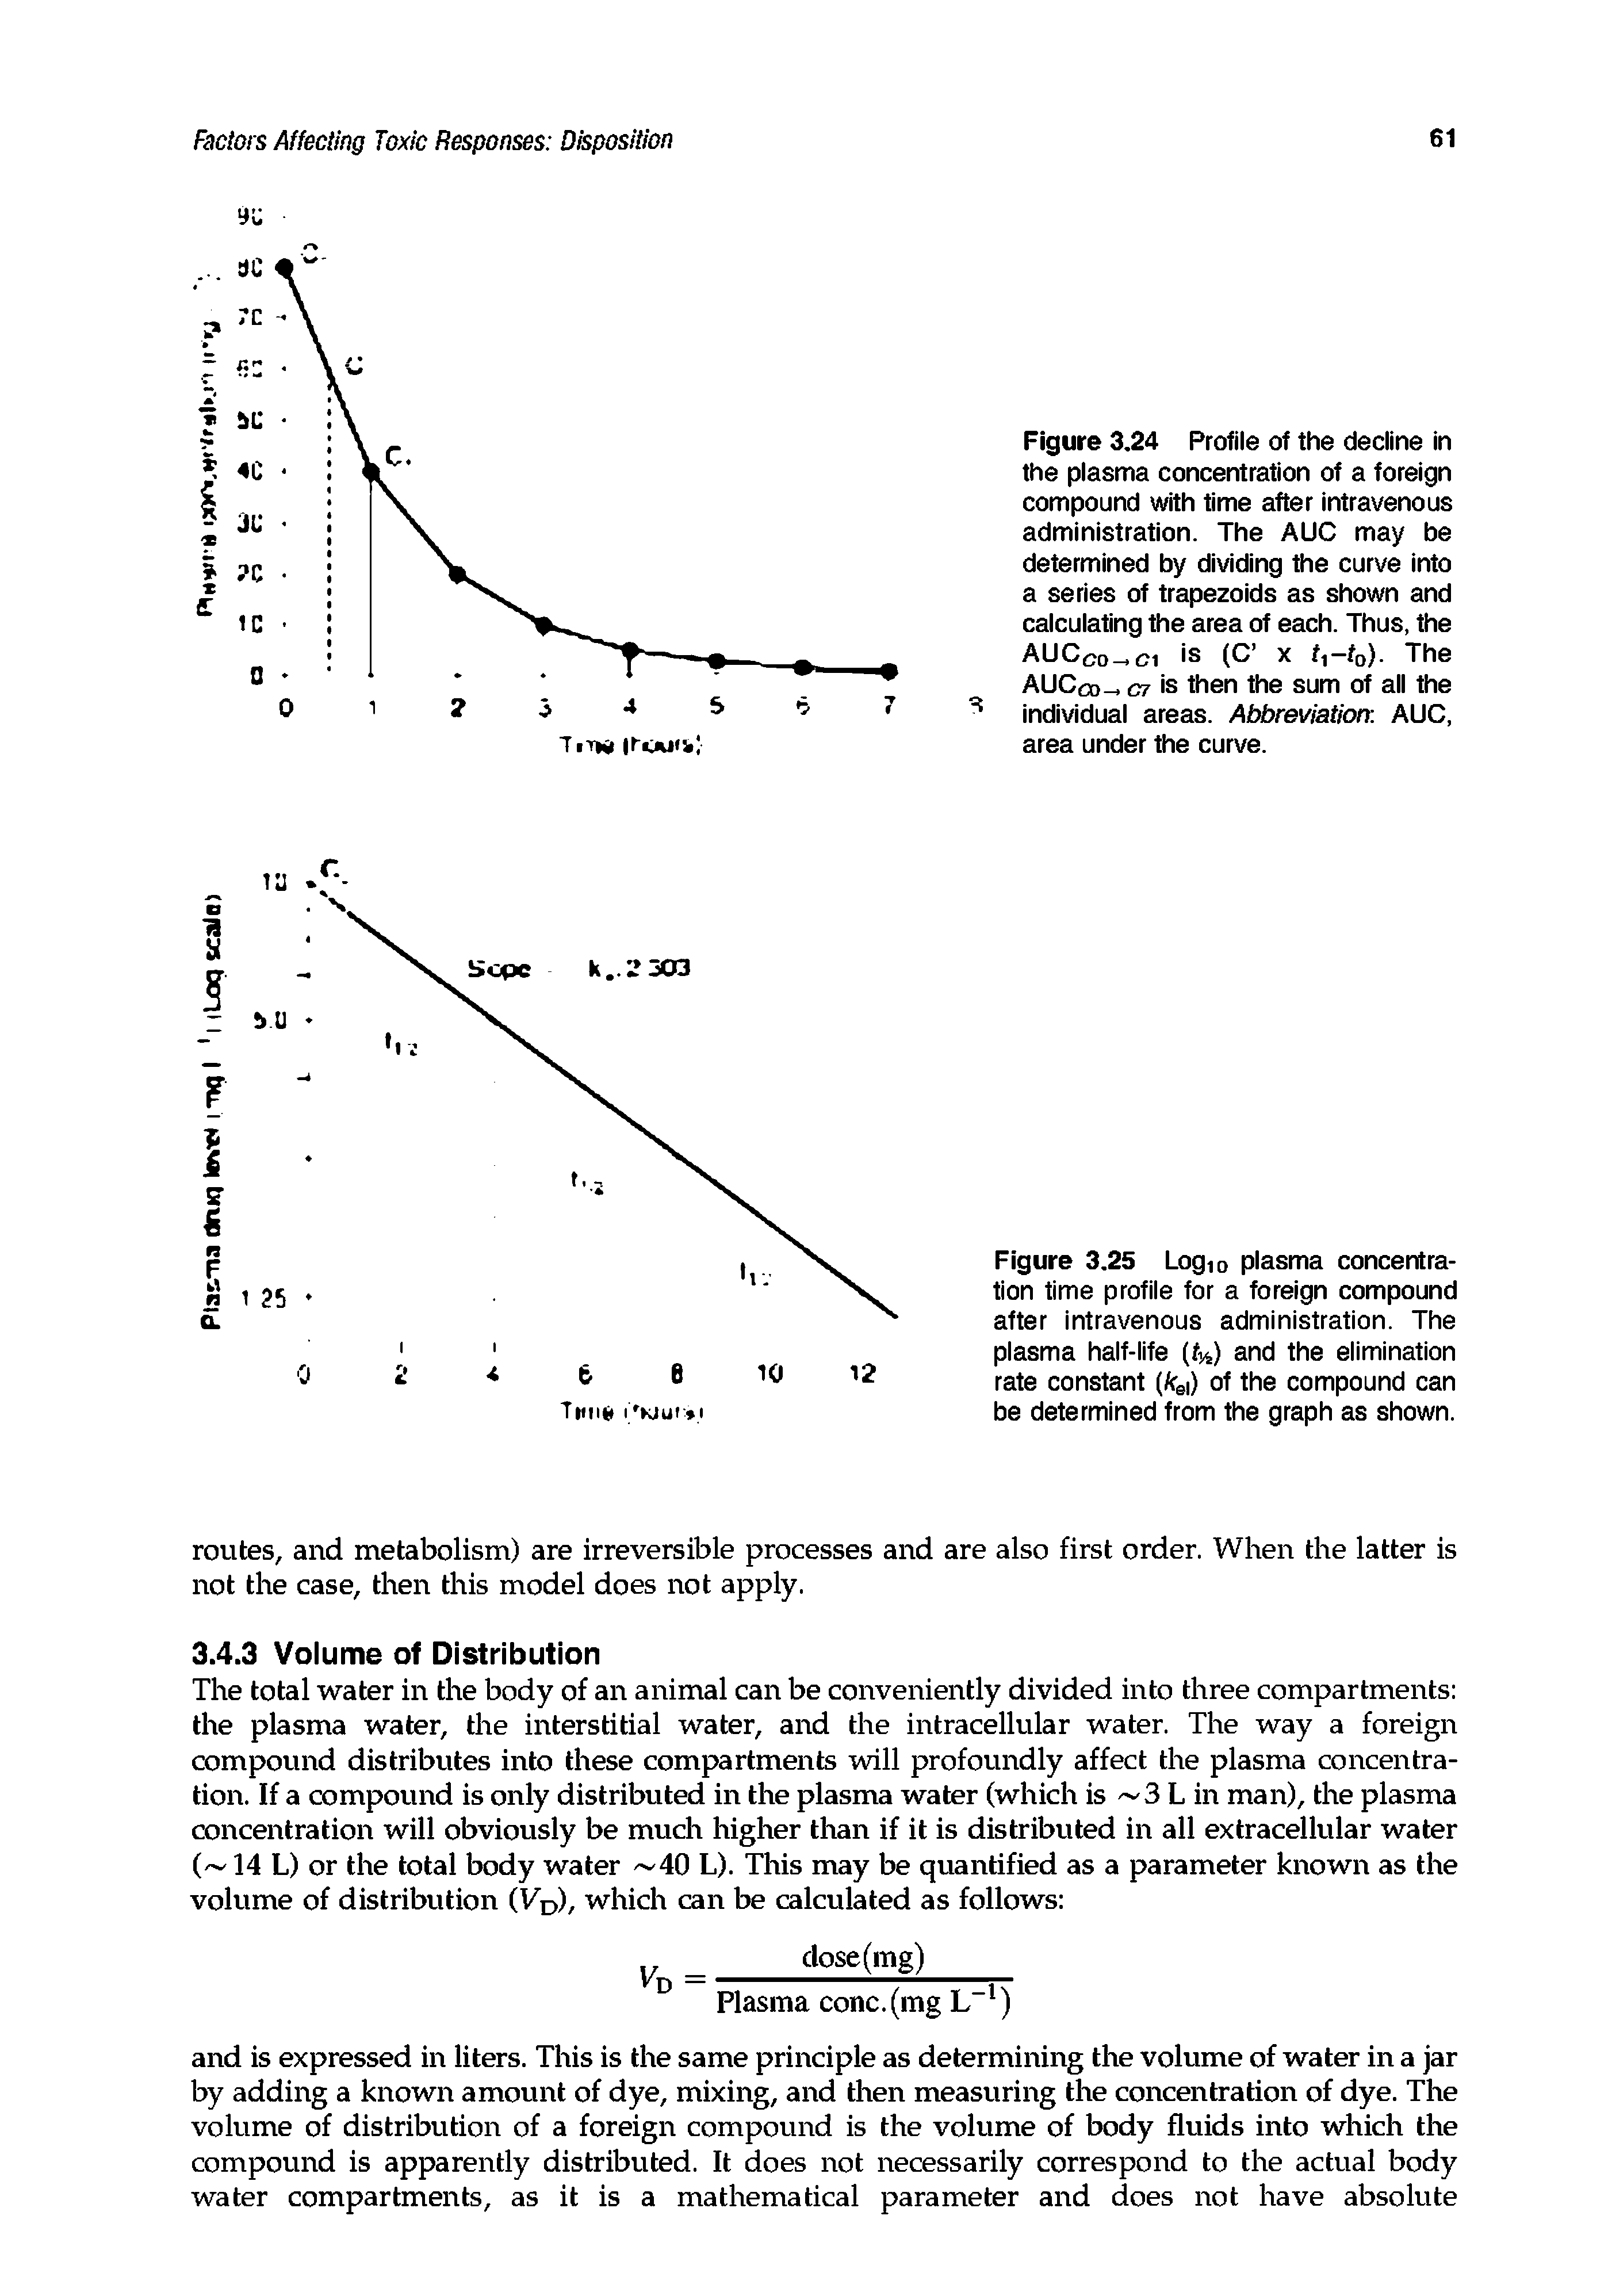 Figure 3.25 Log10 plasma concentration time profile for a foreign compound after intravenous administration. The plasma half-life (fo) and the elimination rate constant (fce ) of the compound can be determined from the graph as shown.